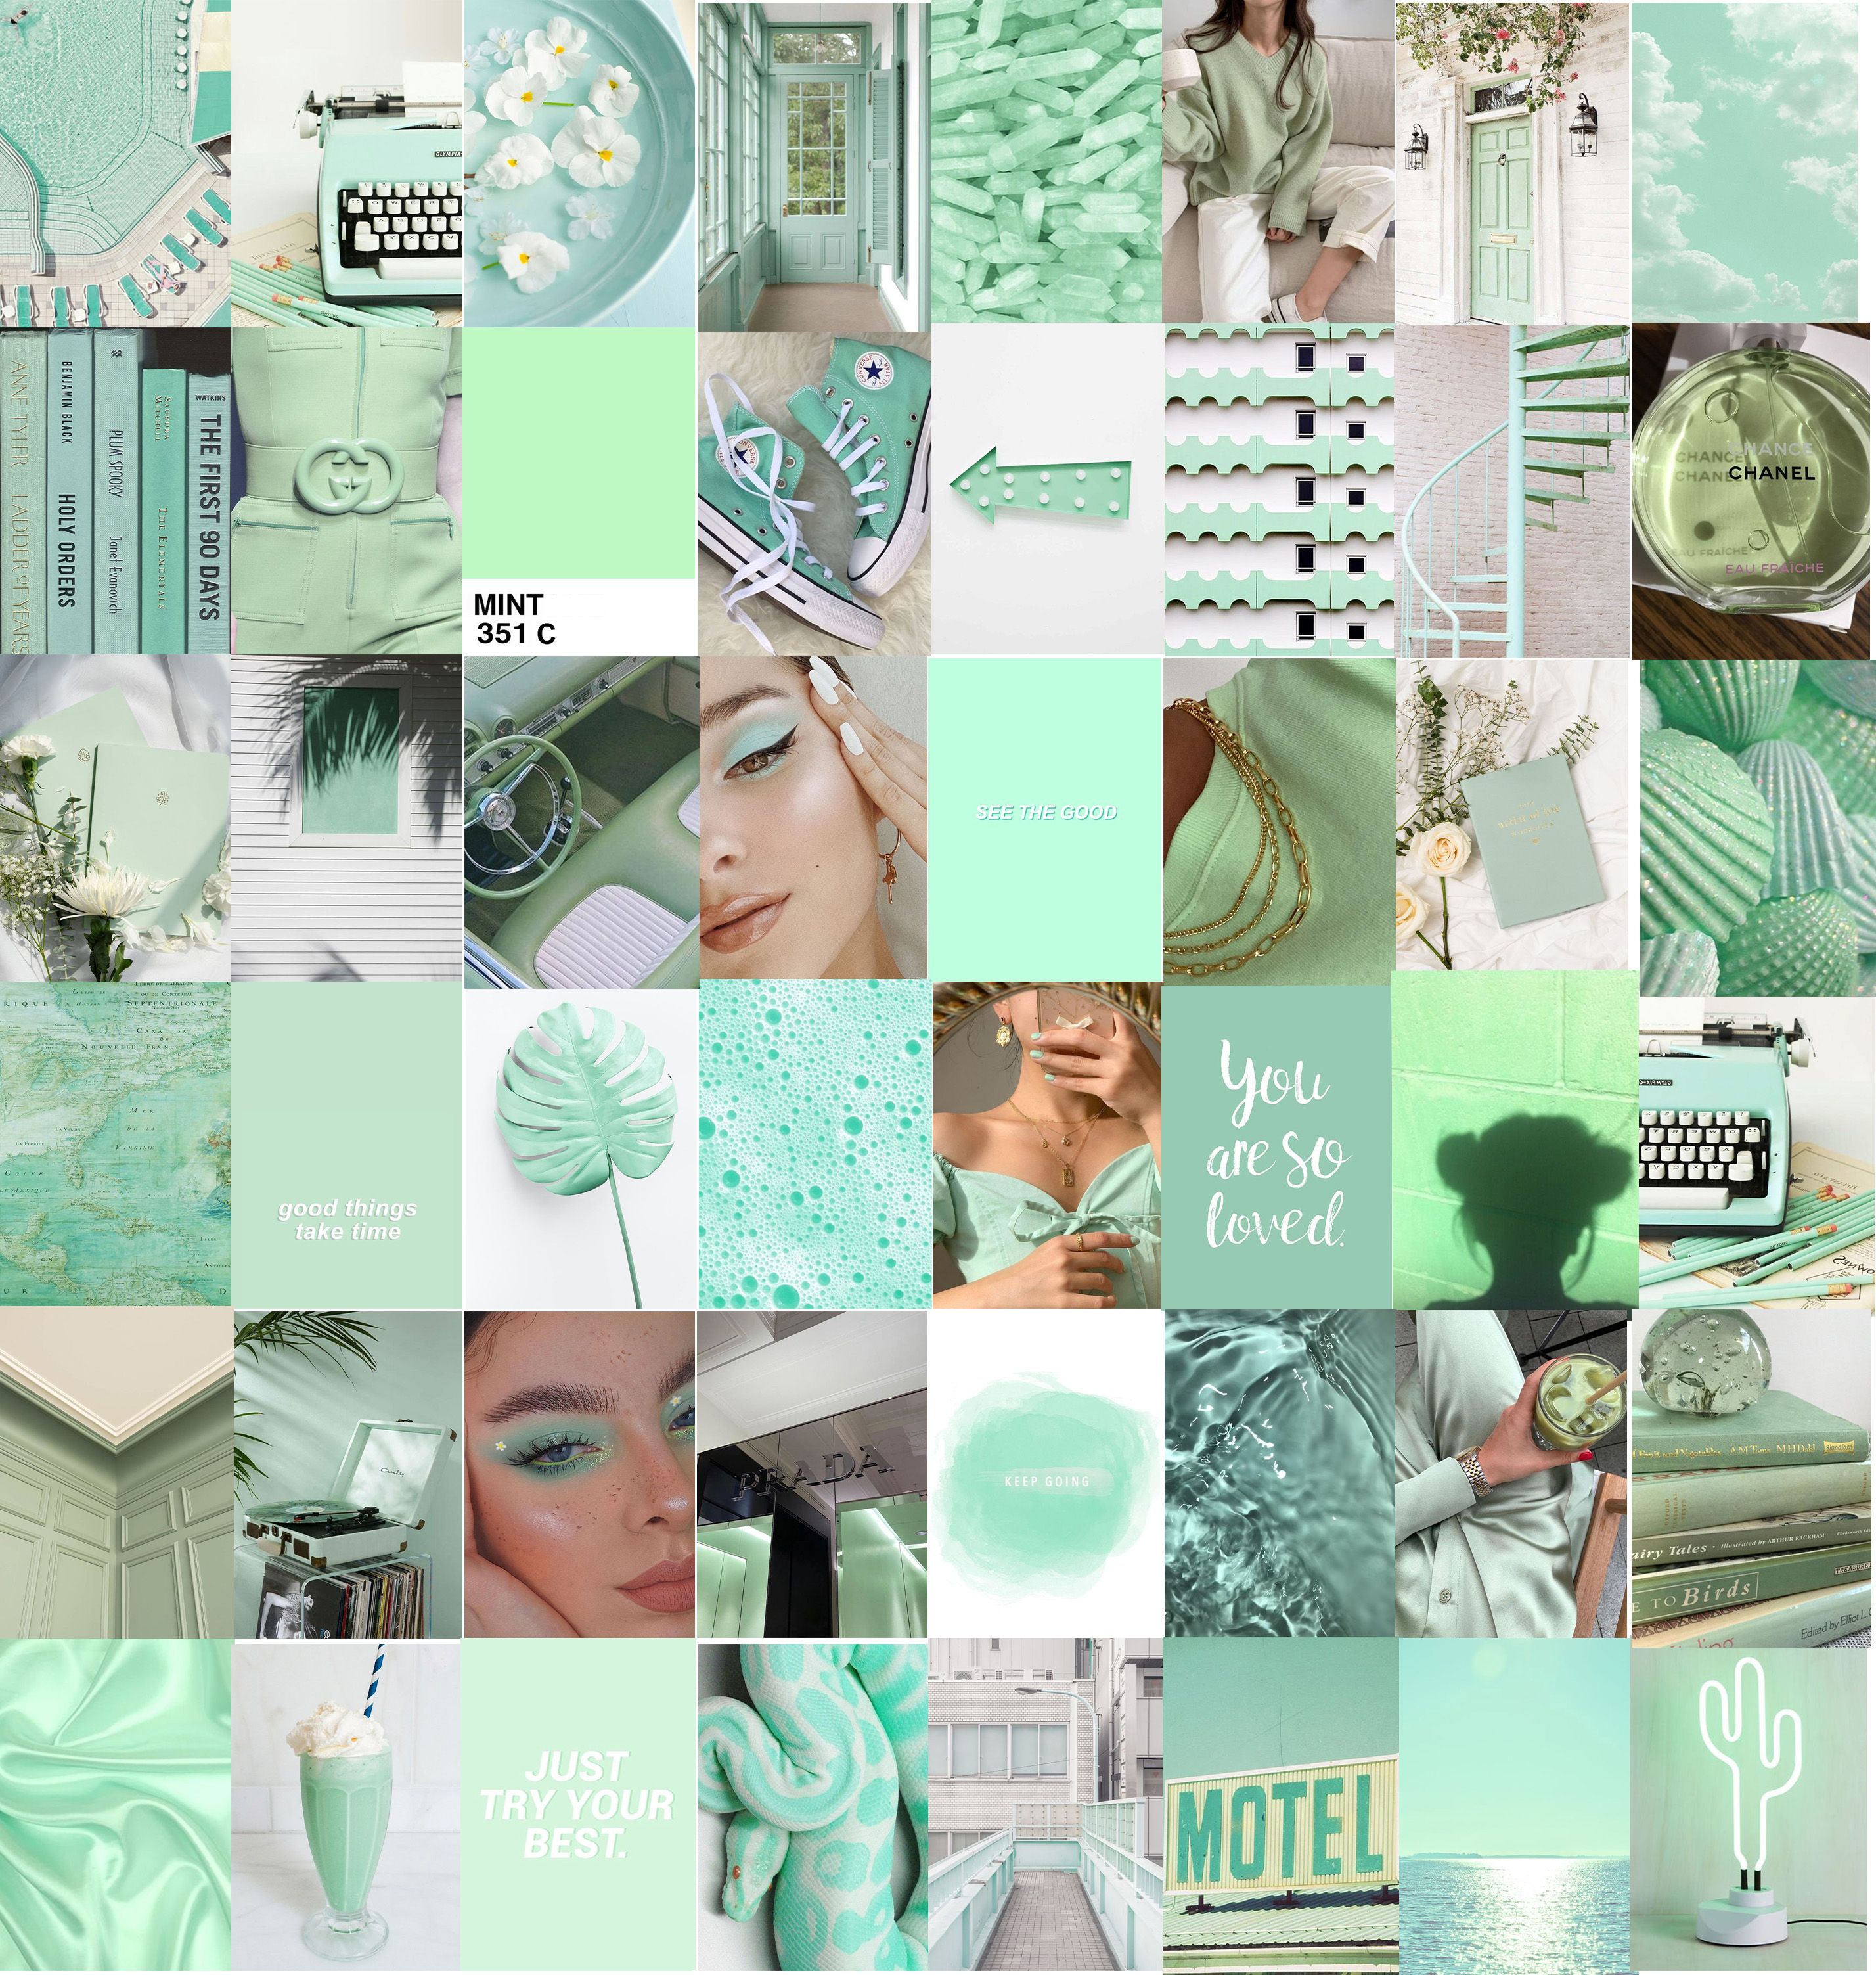 Green Aesthetic Boujee Wall Collage Kit Room Dorm Decor 50pcs. Wall collage, Color collage, Mint green wallpaper iphone